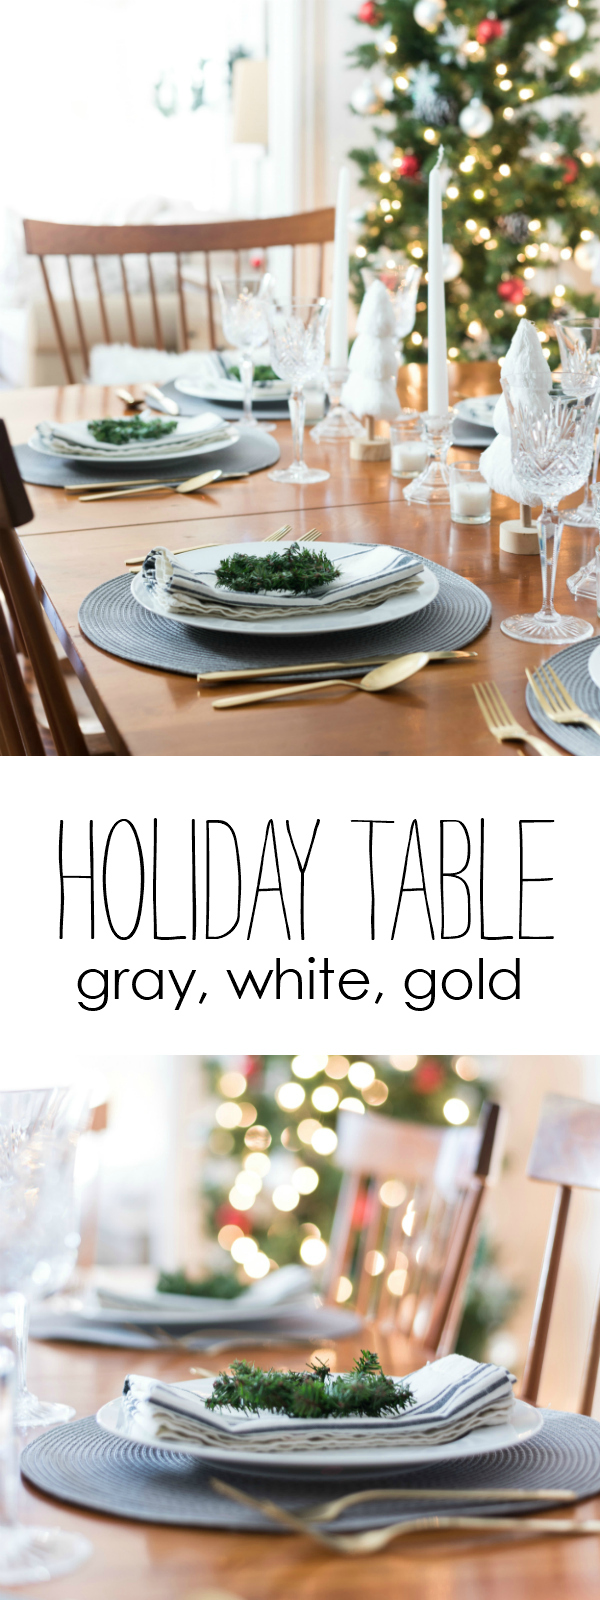 Christmas Table Setting in Gray, White, Gold